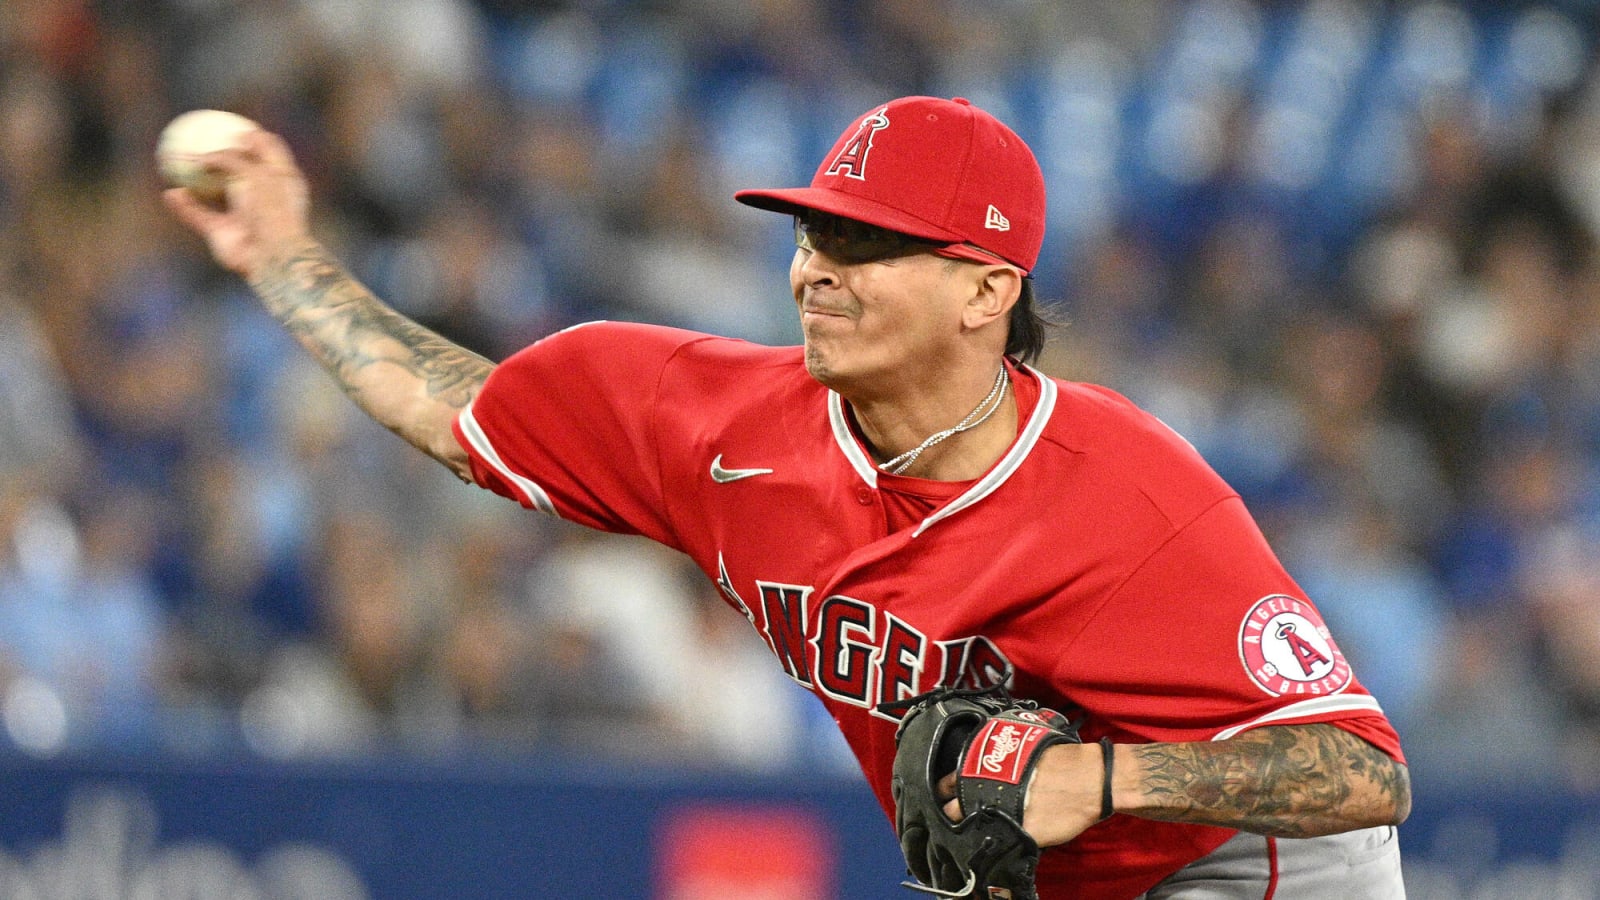 Jesse Chavez - MLB Relief pitcher - News, Stats, Bio and more